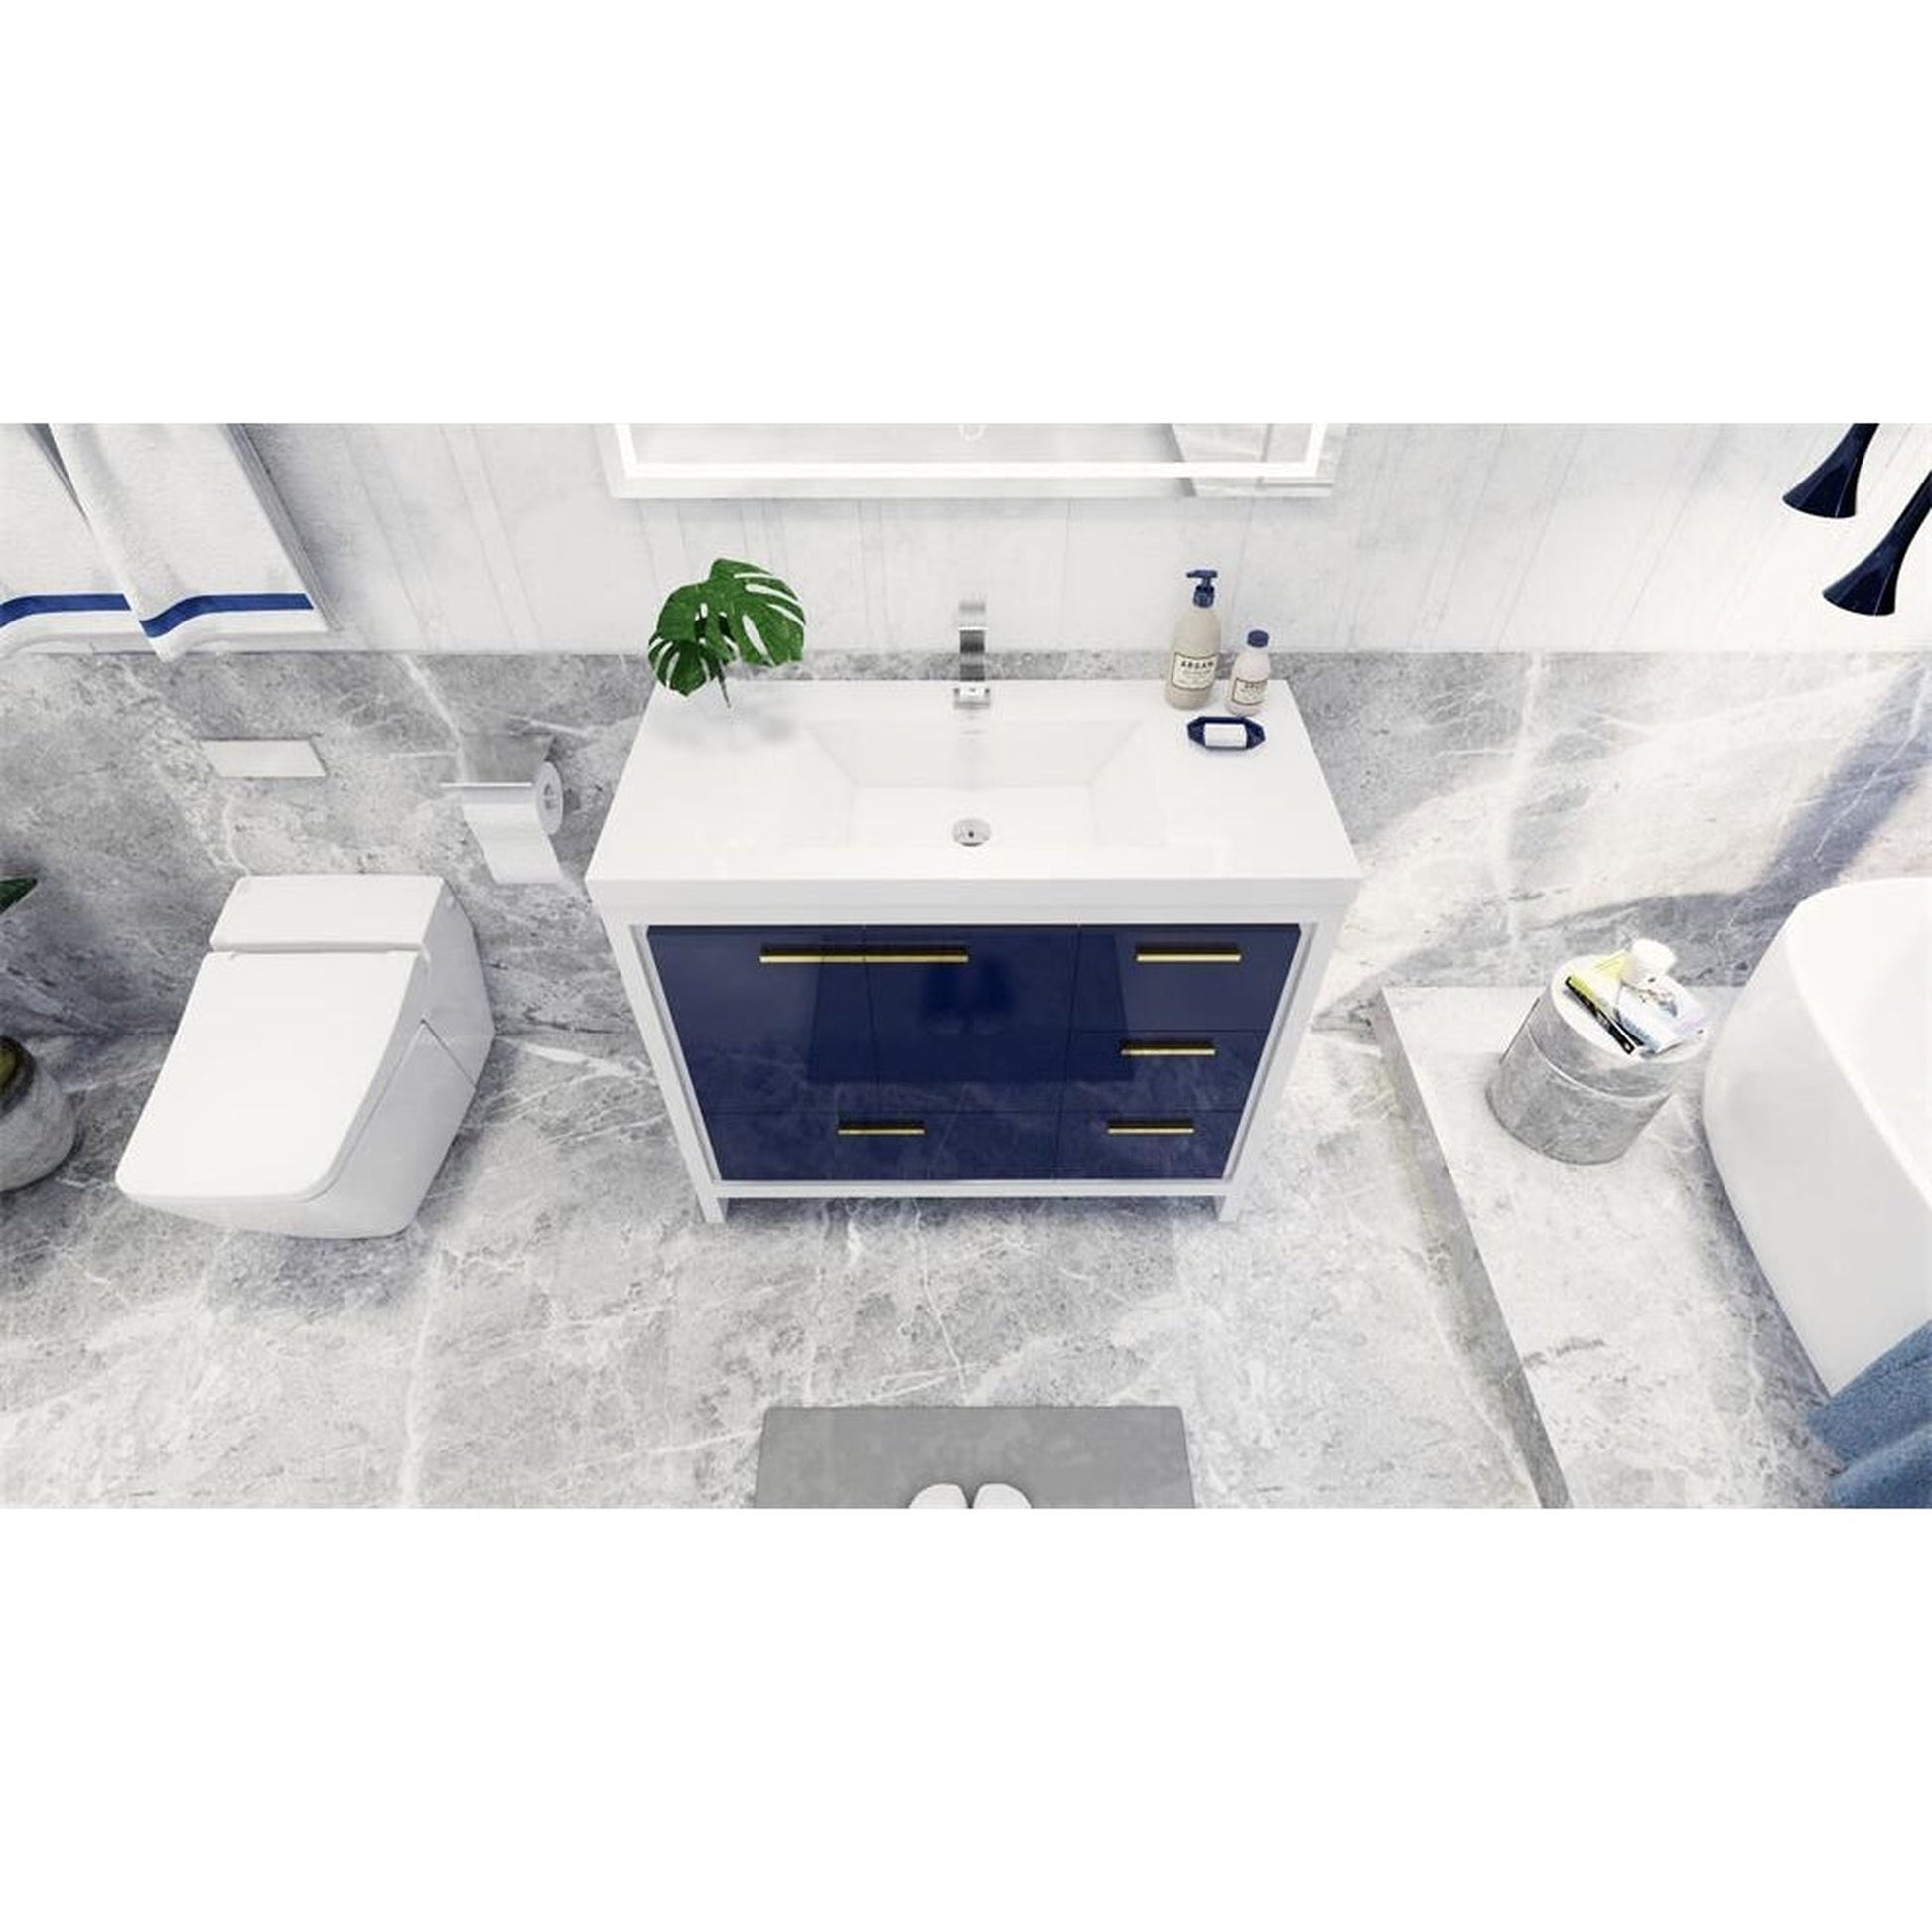 Moreno Bath Dolce 42" High Gloss Night Blue Freestanding Vanity With Right Side Drawers and Single Reinforced White Acrylic Sink